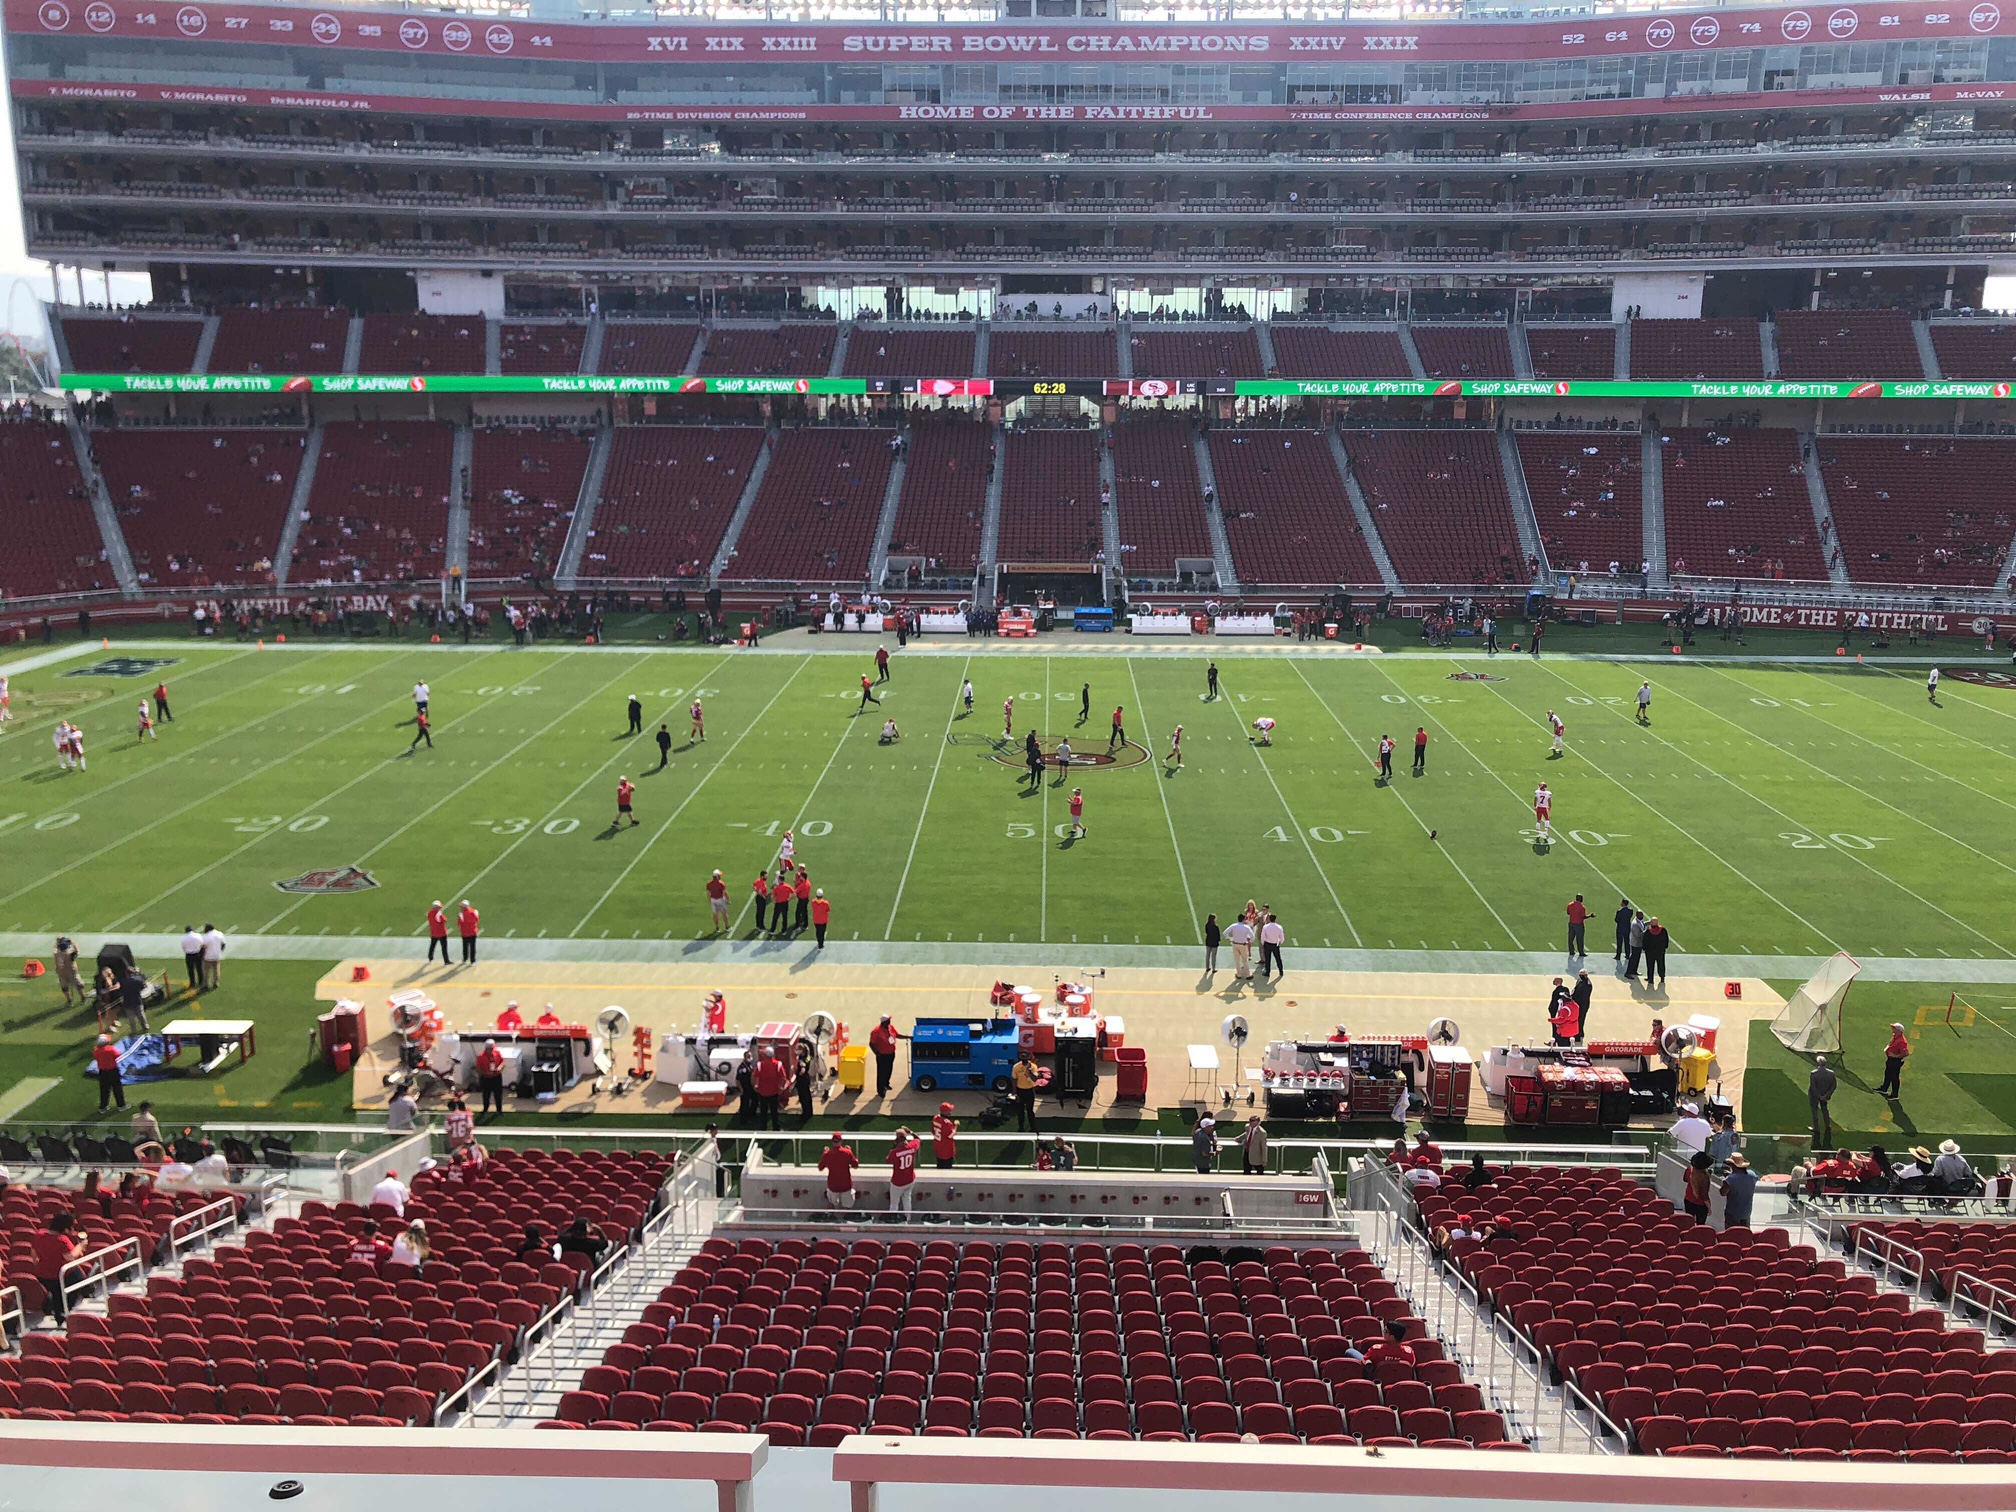 Raiders vs 49ers Tickets for Sale 2021